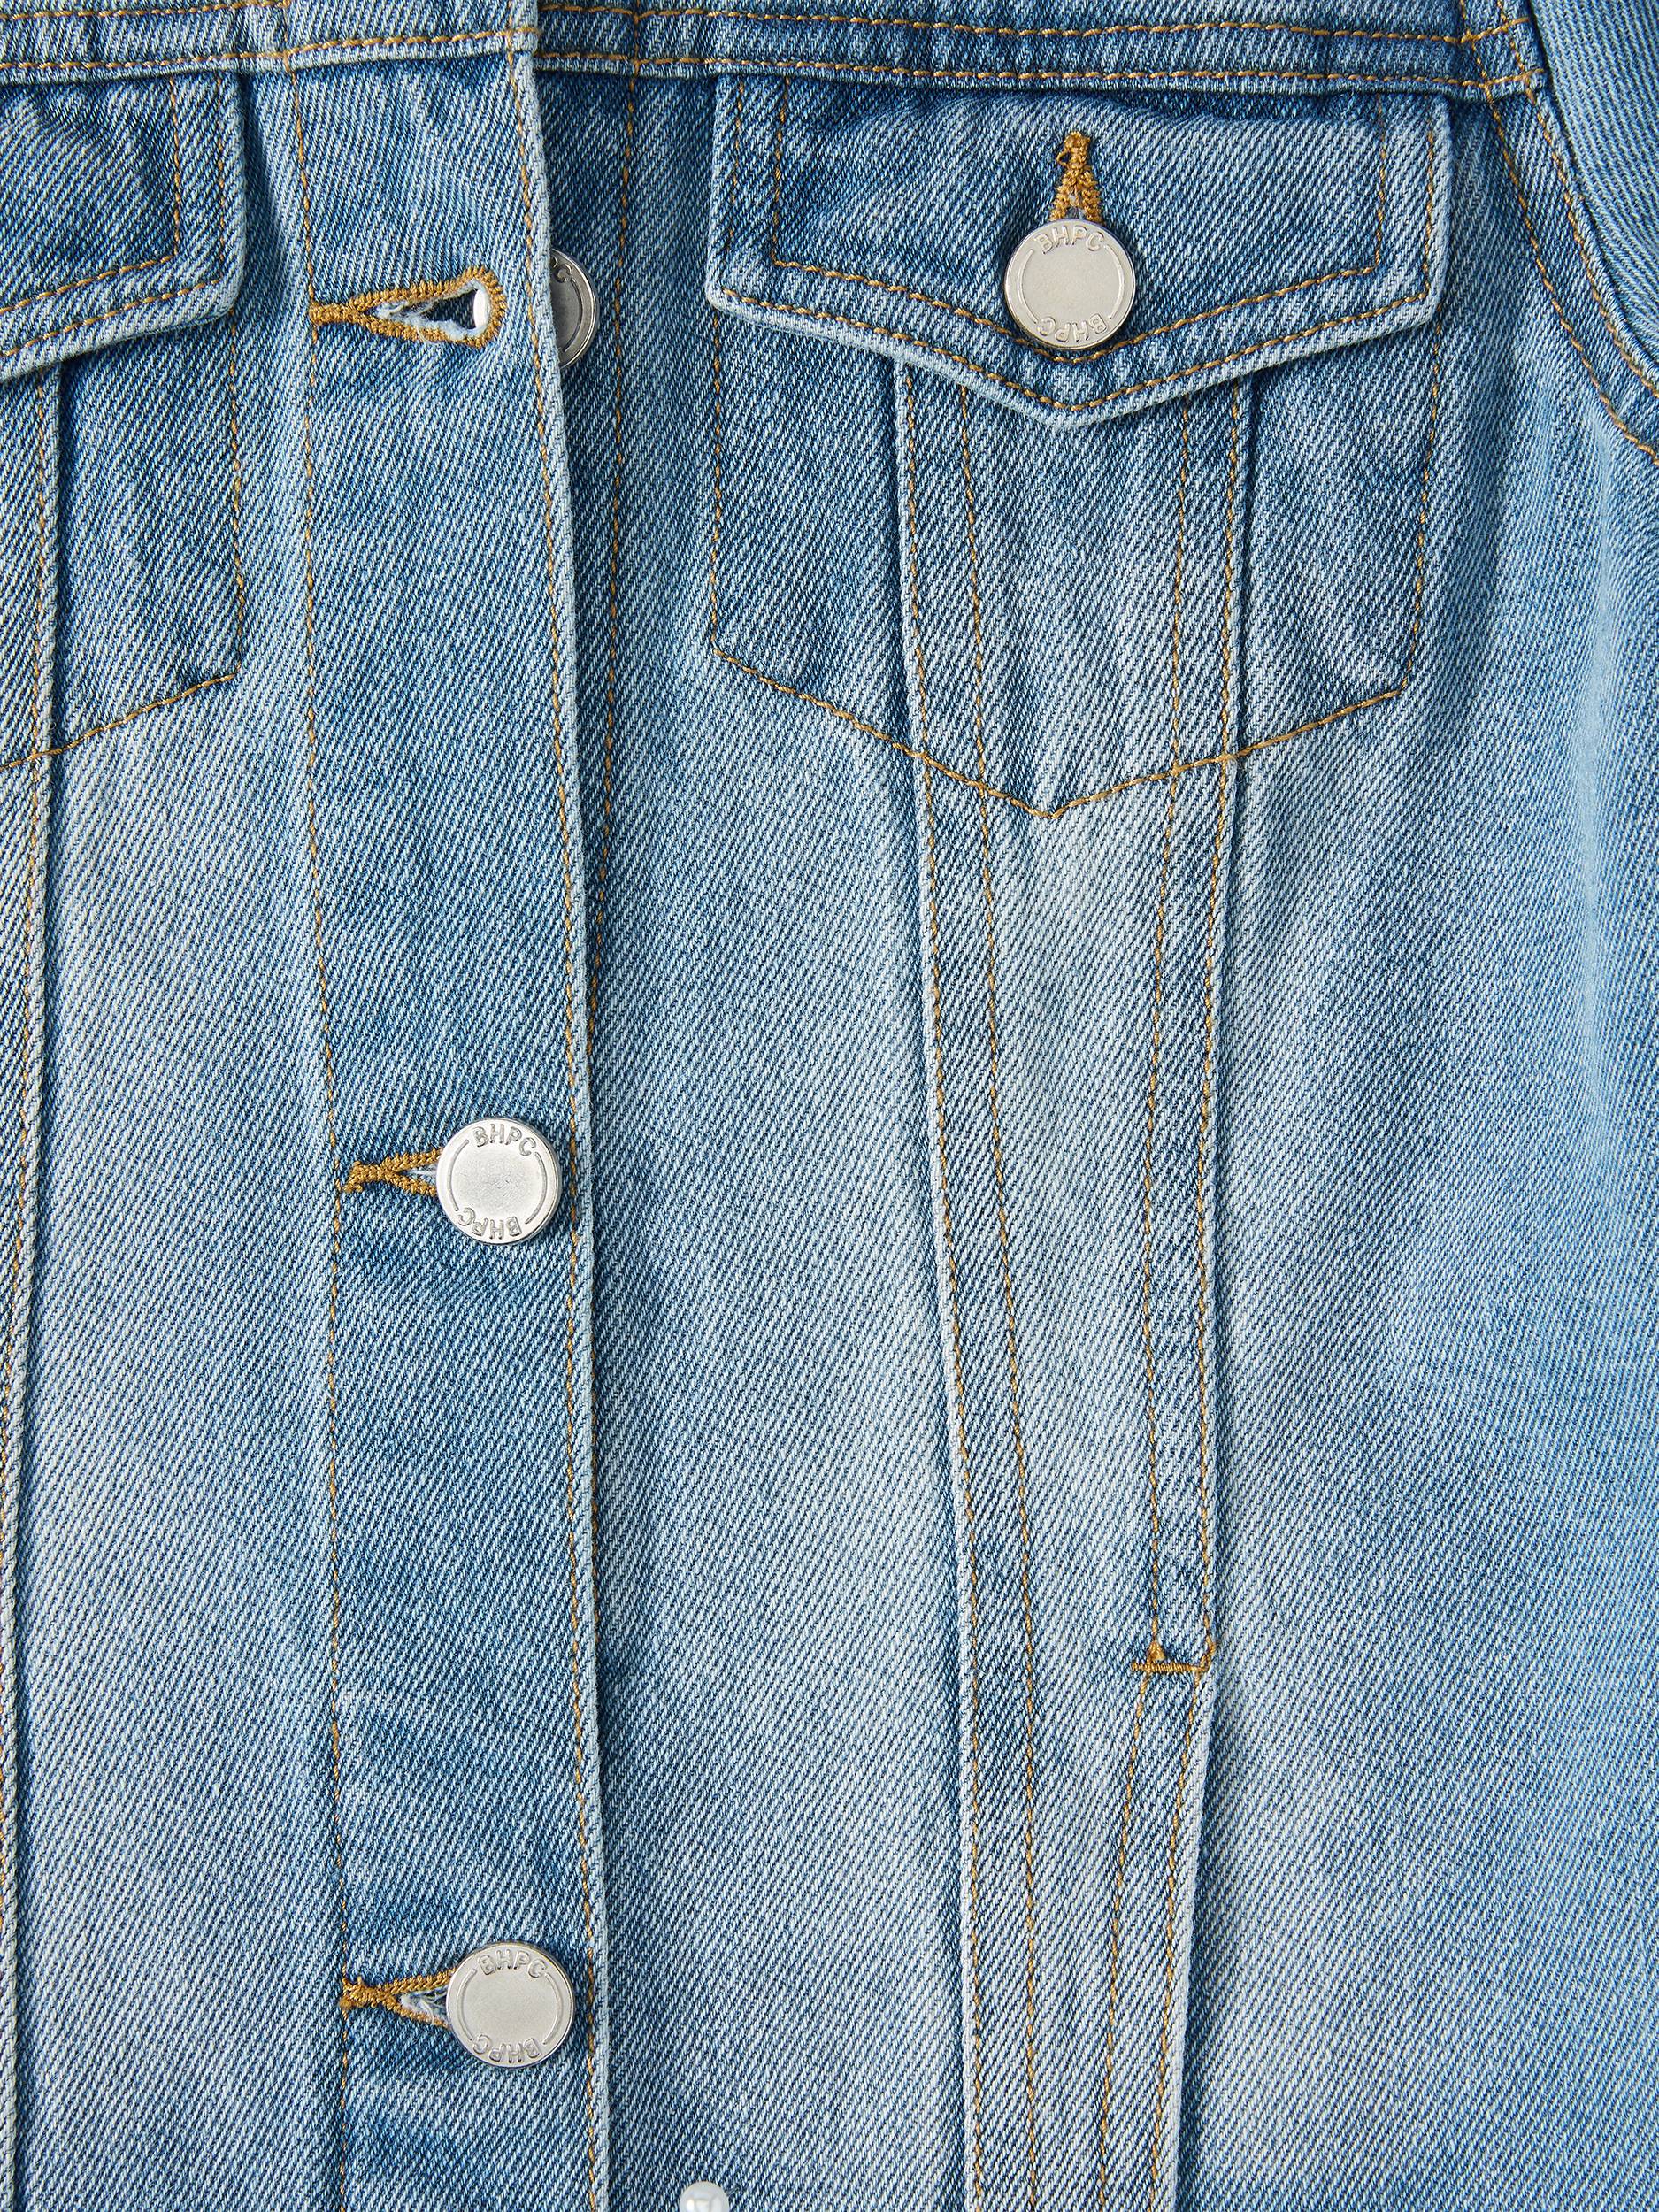 Beverly Hills Polo Club Girls 4-16 Denim Jean Jacket with Pockets - image 2 of 3